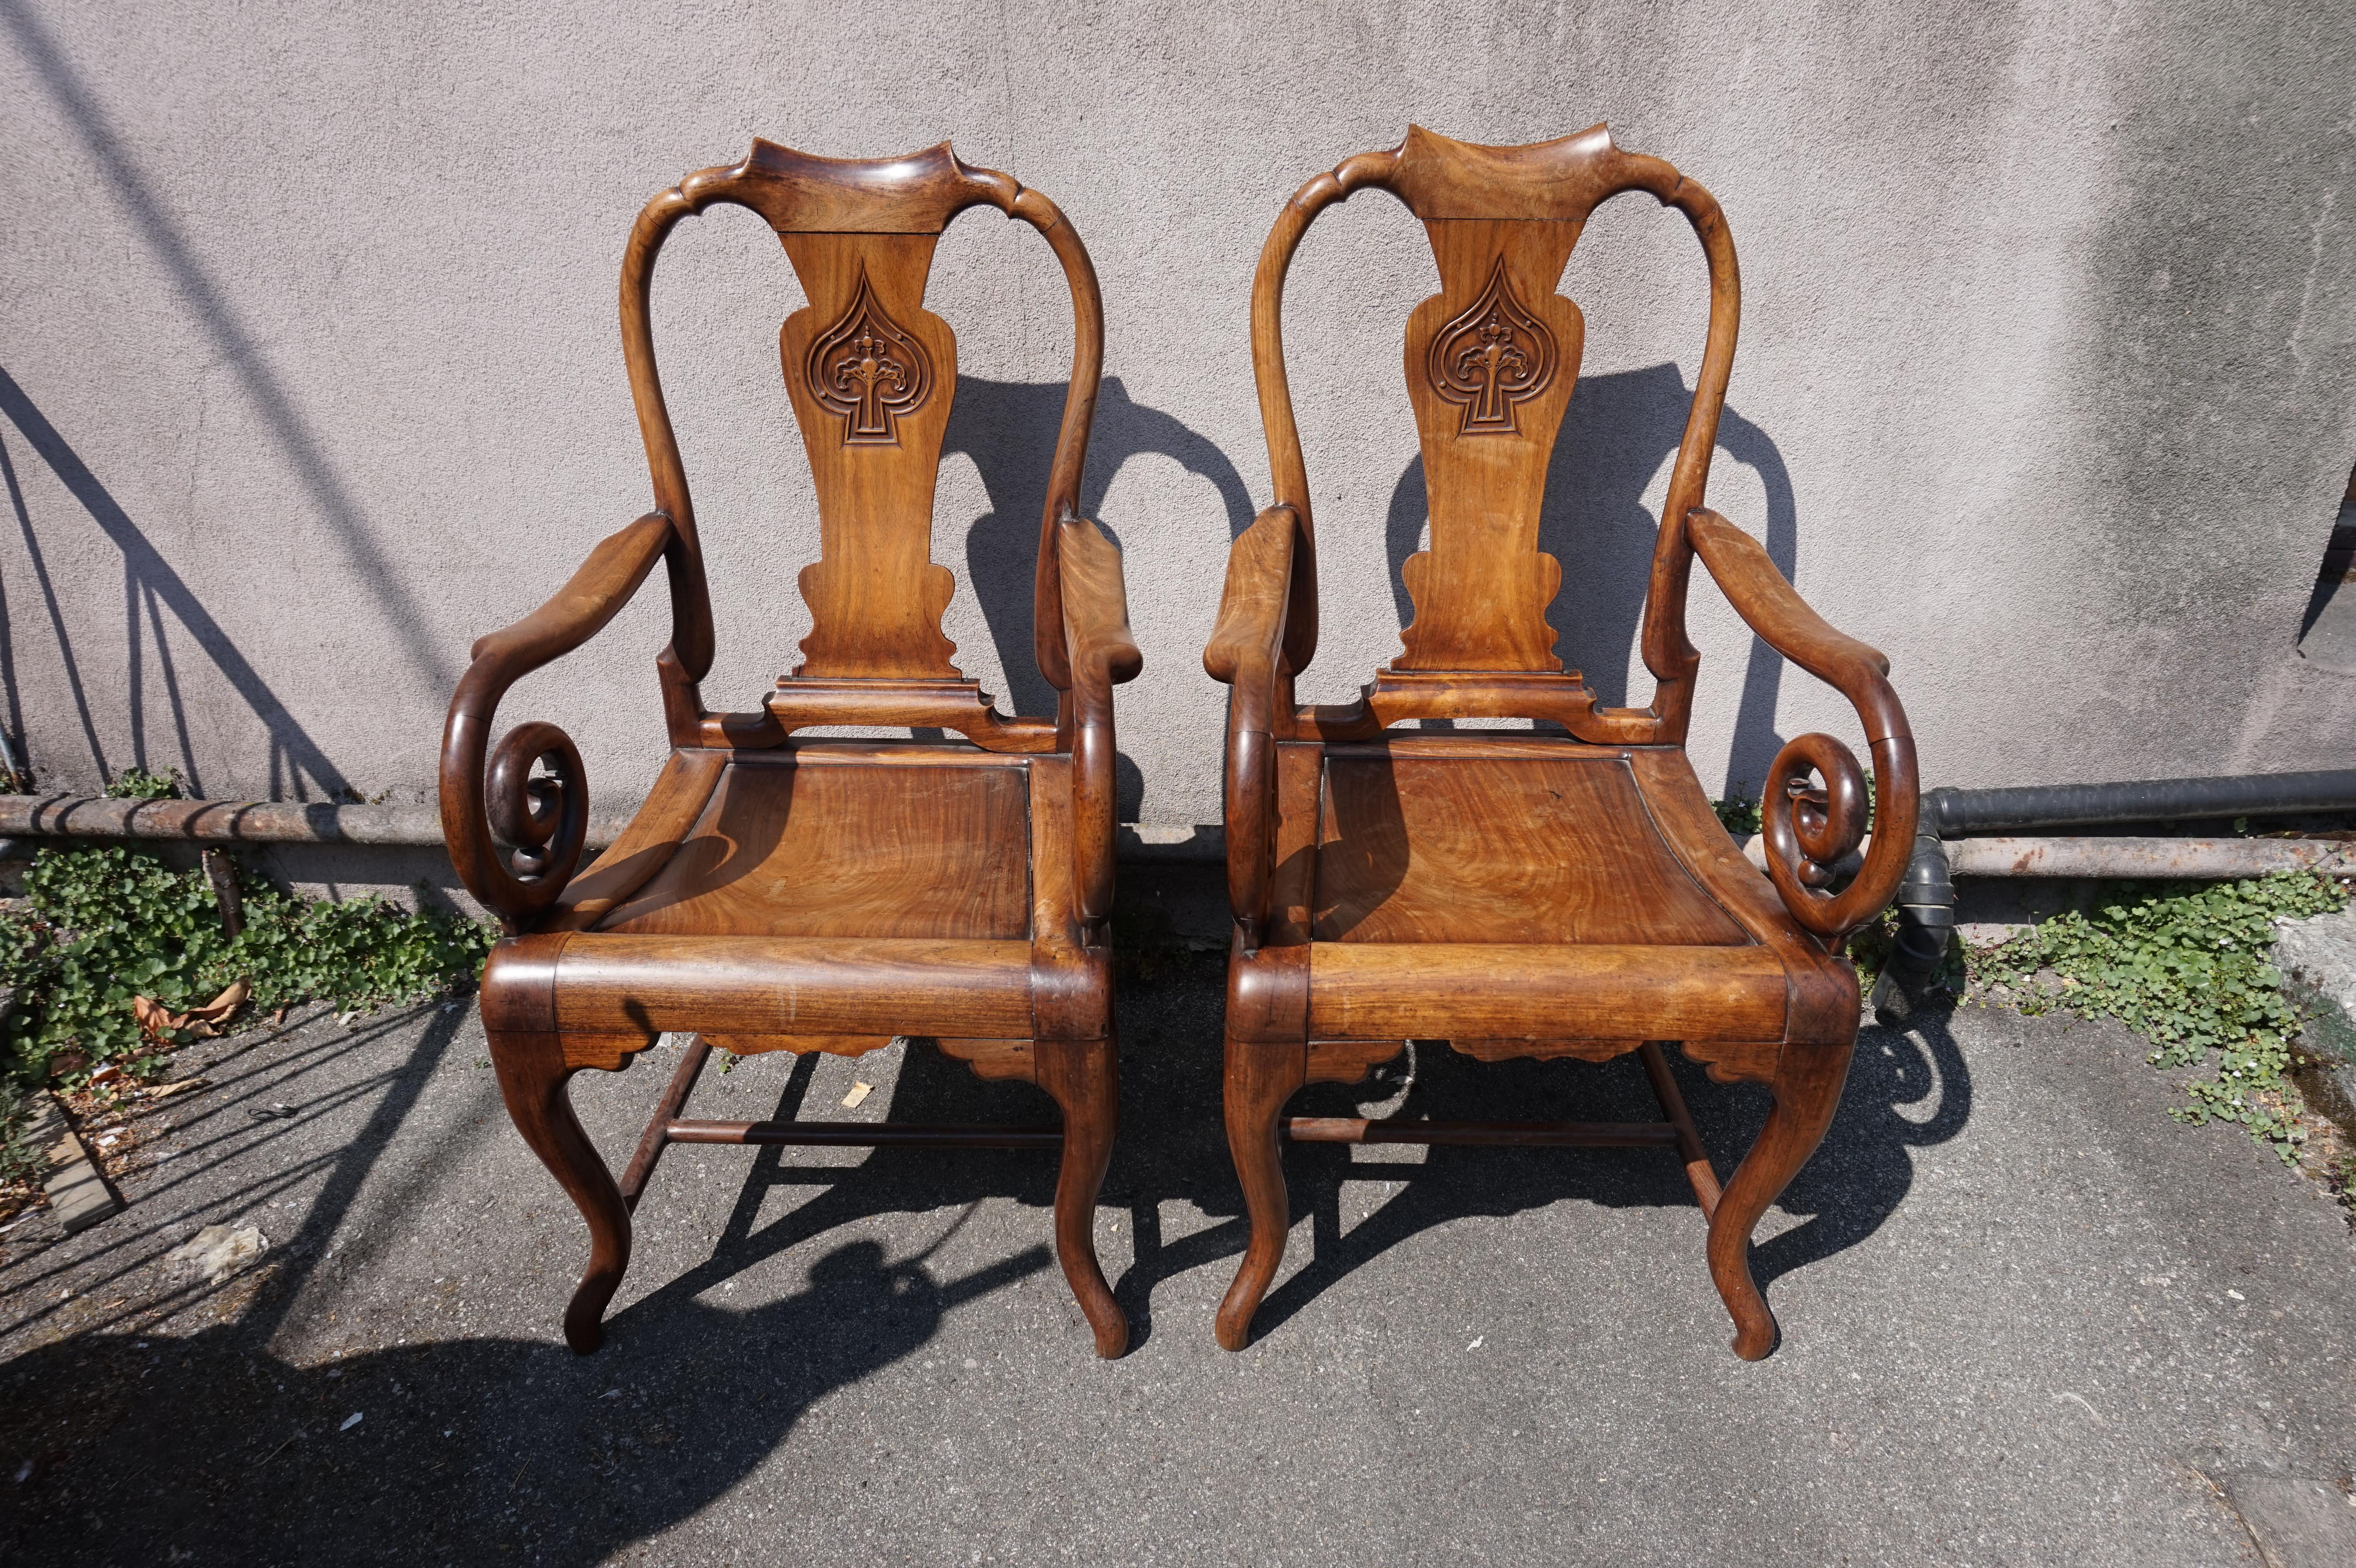 Circa 1890-1900

Exquisitely hand carved Chinese Mahjong chairs with scrolling arms and solid seats. United by stretchers and old joinery work. Top notch craftsmanship, these are conversation pieces that exude design and refinement and look good